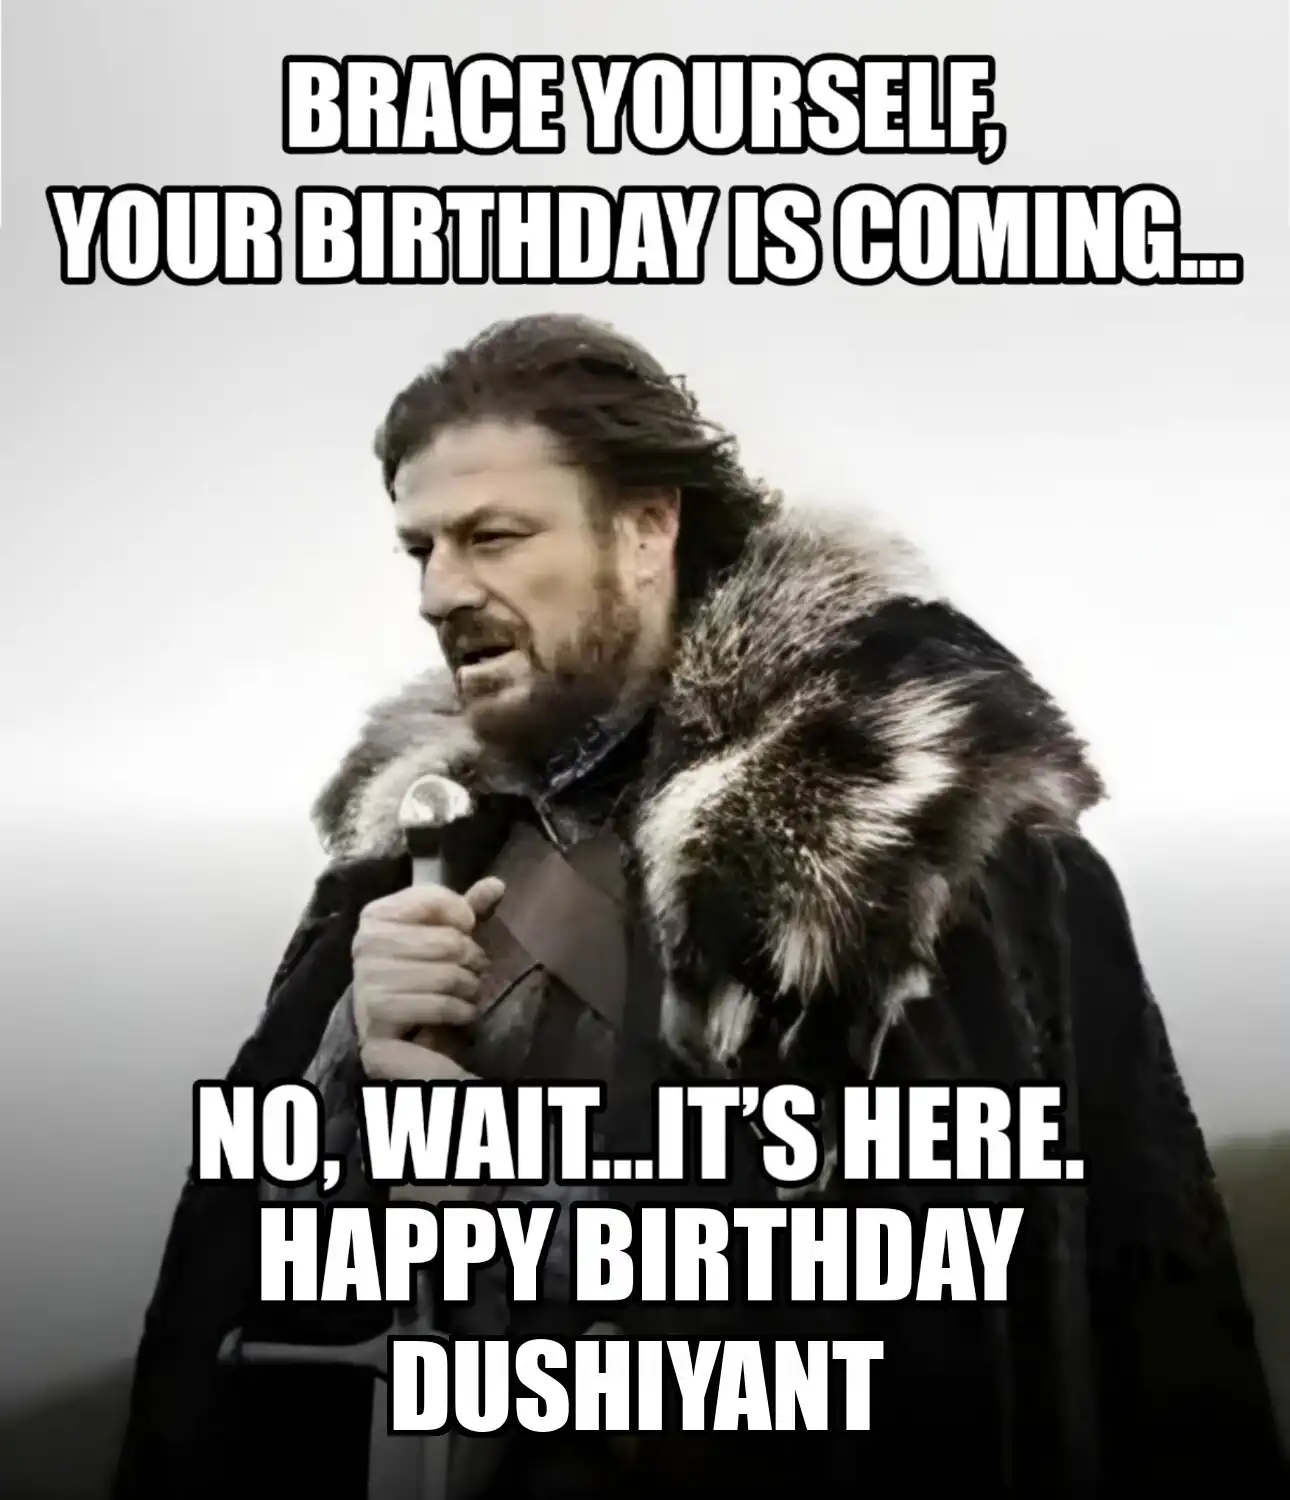 Happy Birthday Dushiyant Brace Yourself Your Birthday Is Coming Meme